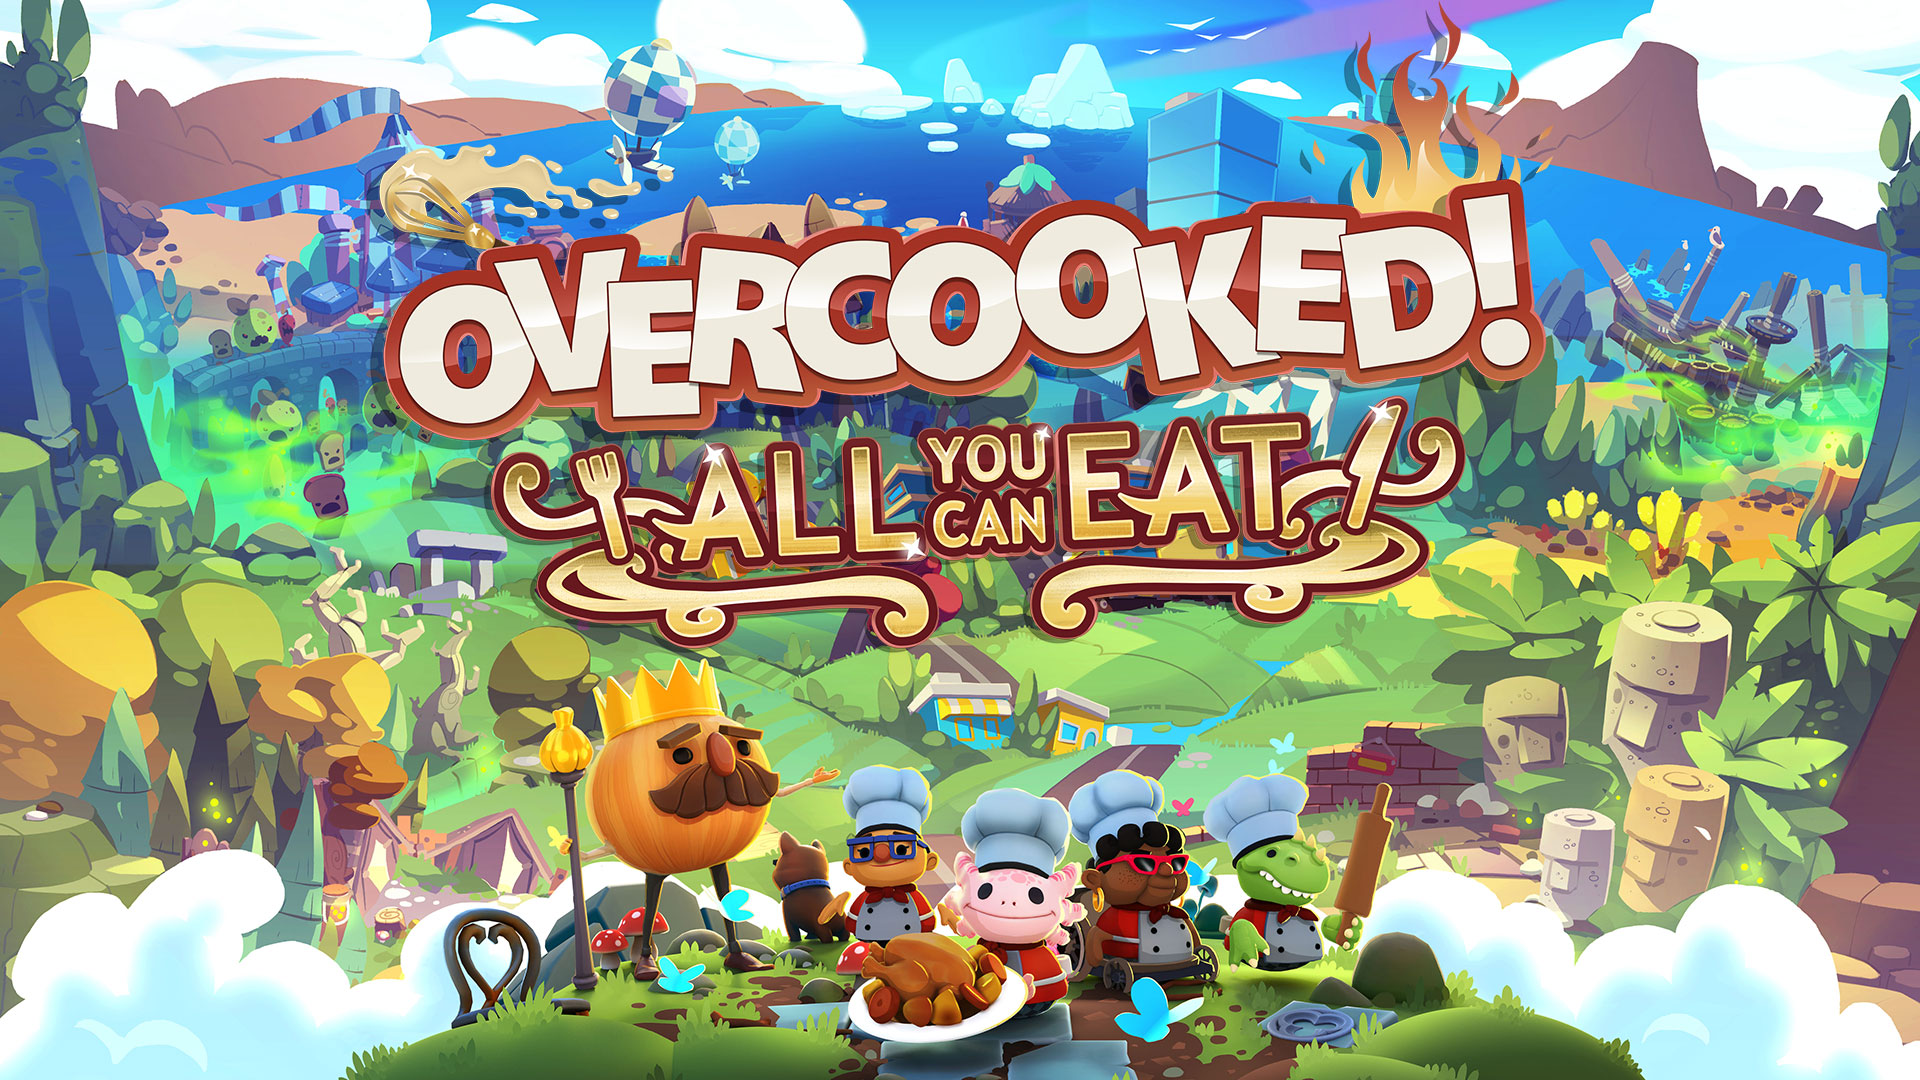 Overcooked All You Can Eat Out Now On All Platforms Team17 Group Plc